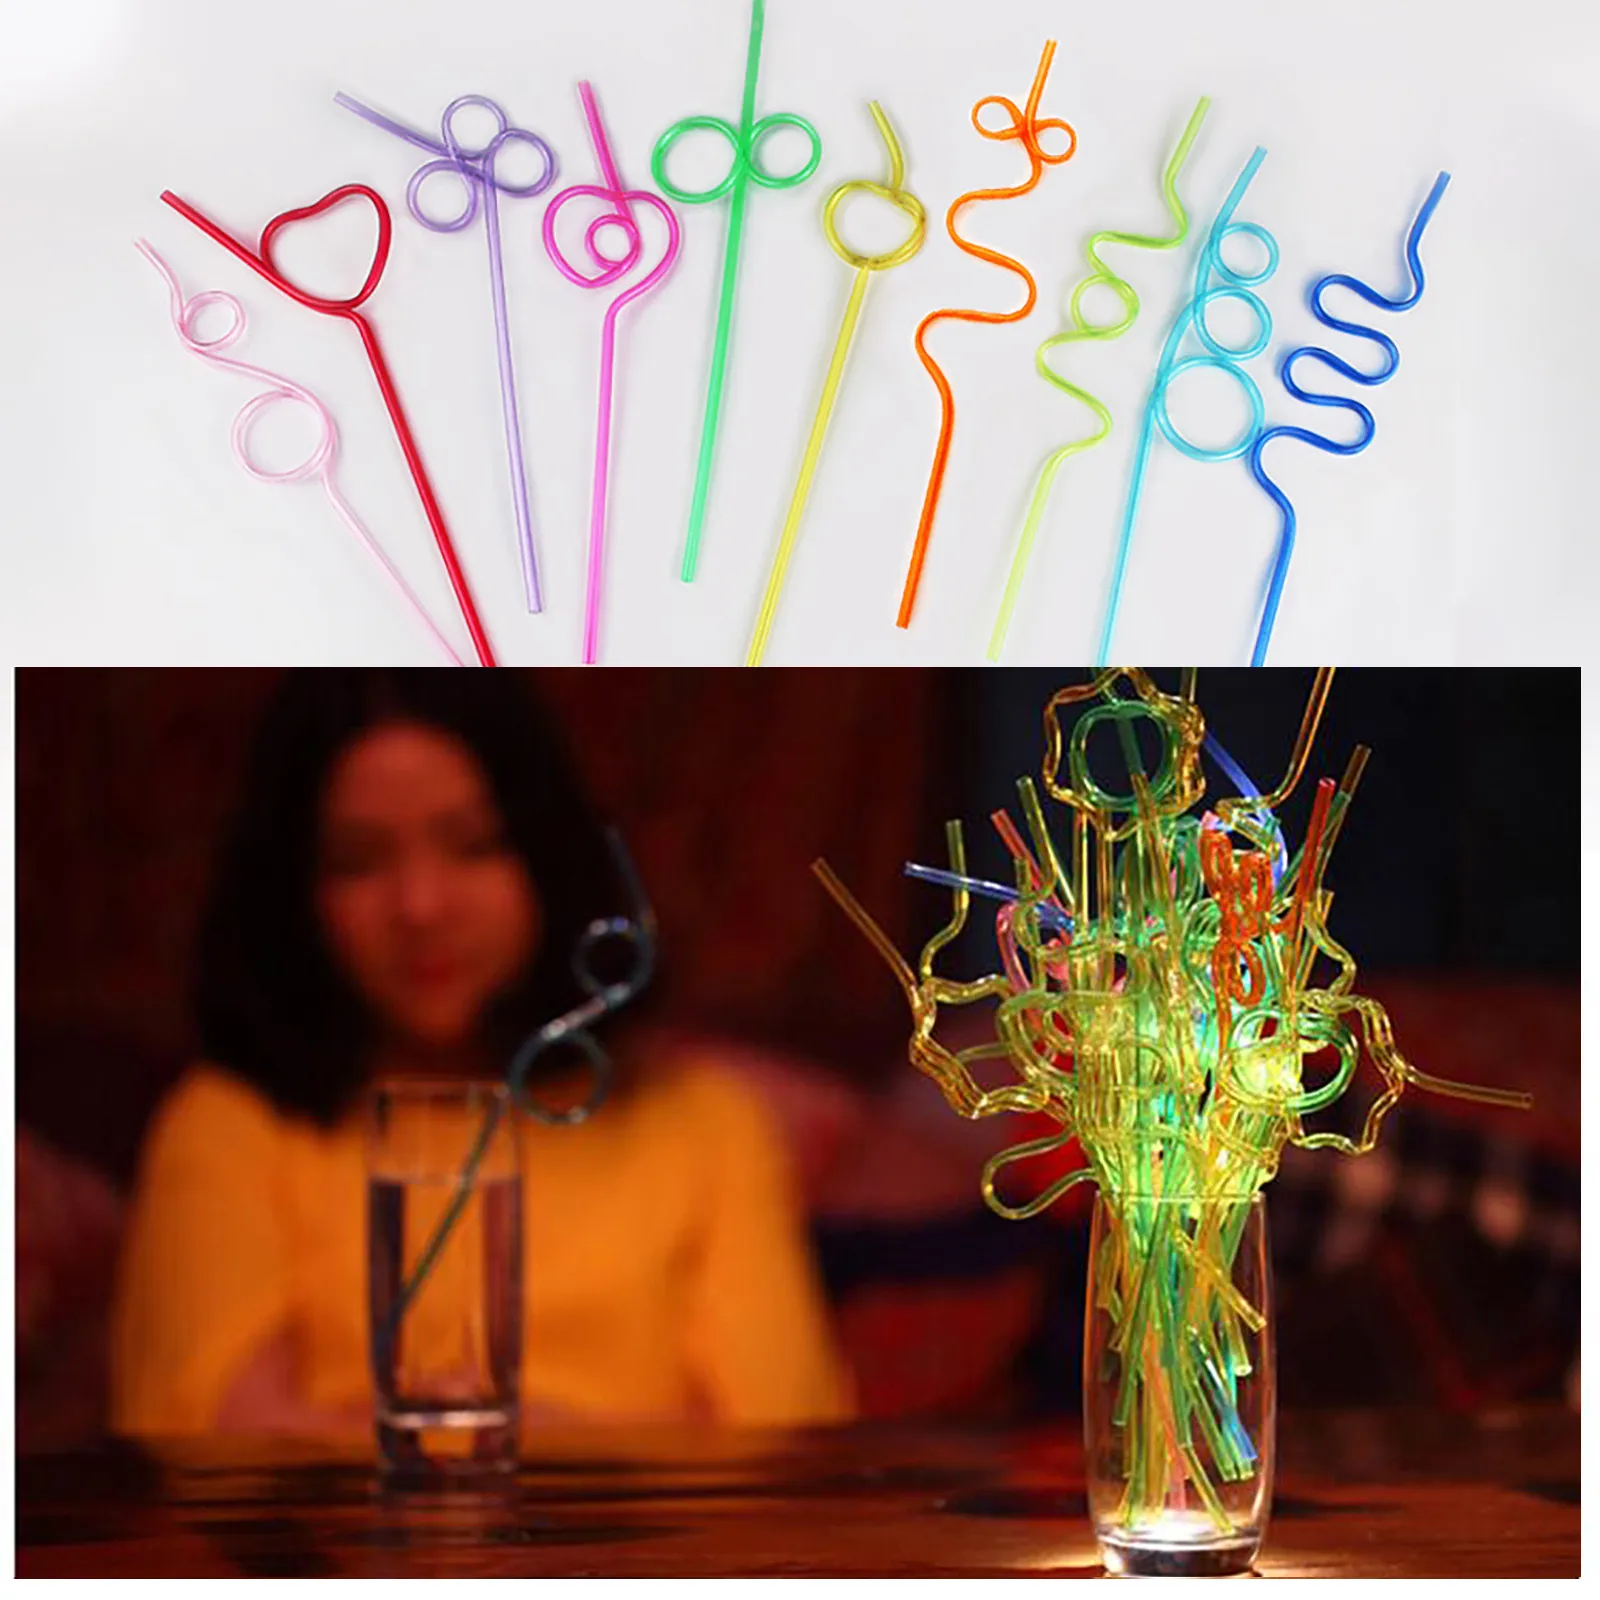 

10pc Funny Soft Plastic Curly Loop Straw Colorful Homebrew Kawaii Unique Flexible Drinking Tube Kids Party Bar Accessories Beer